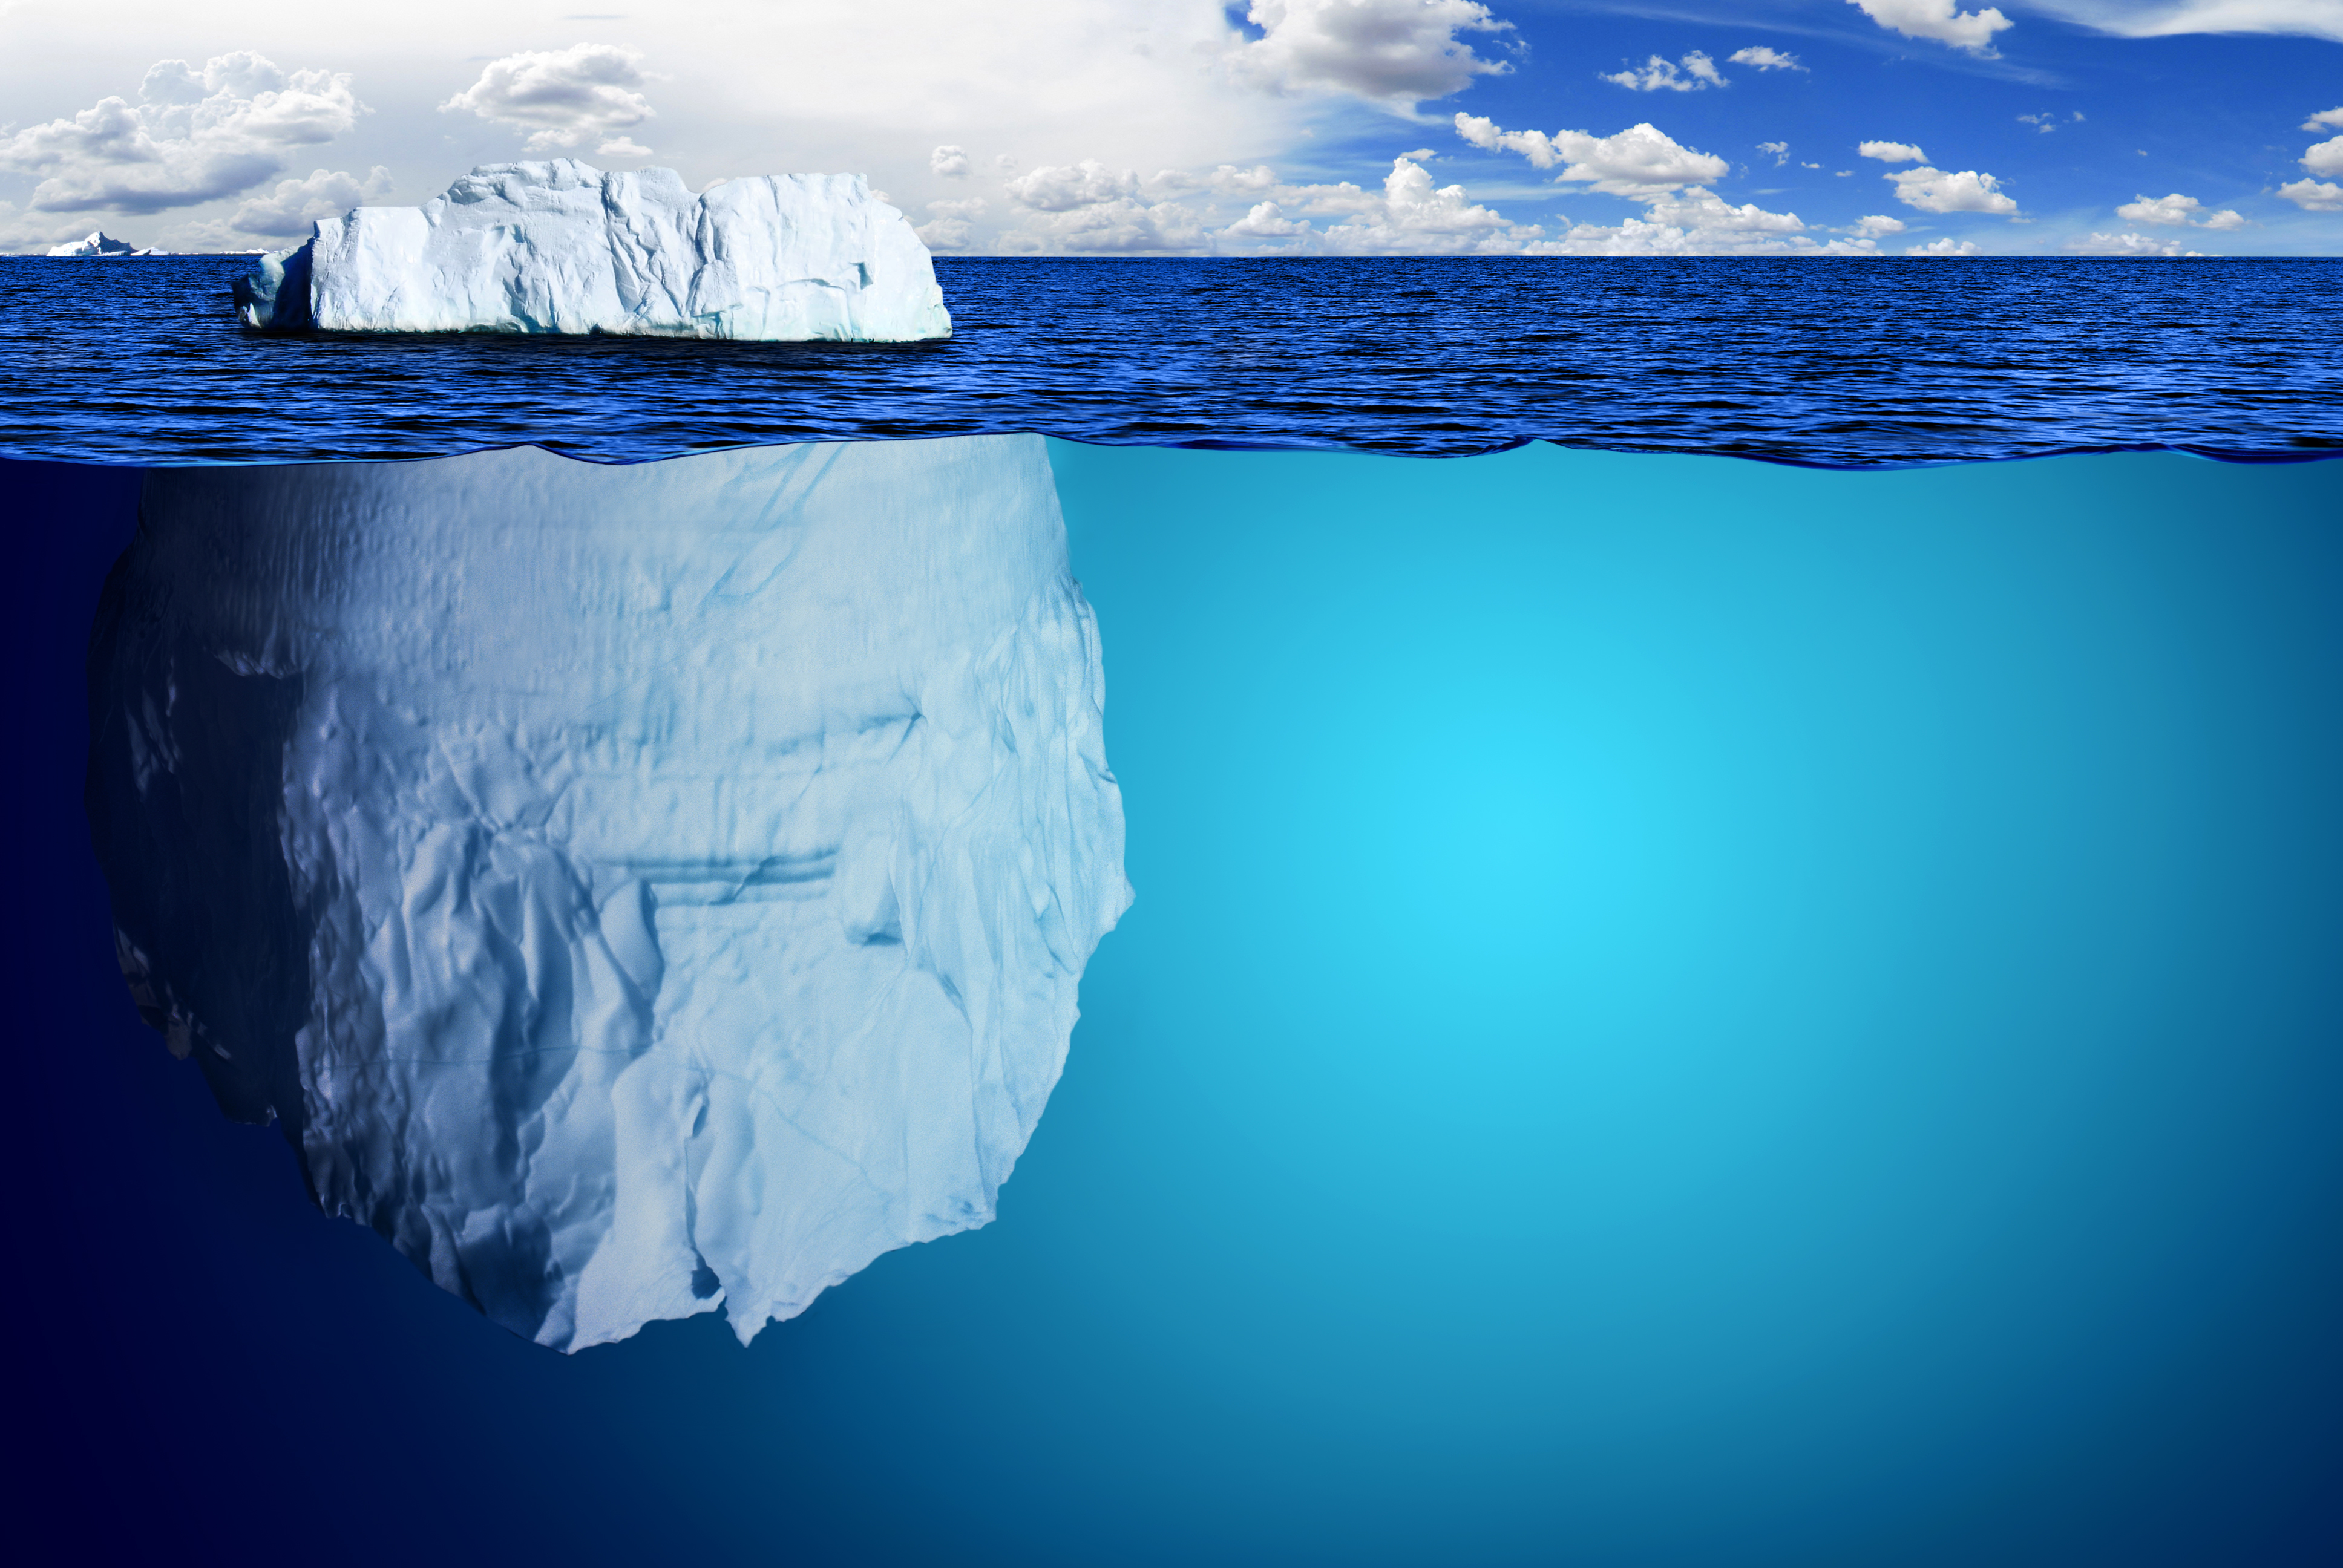 Are you at the tip of the iceberg? - Eddie Yu